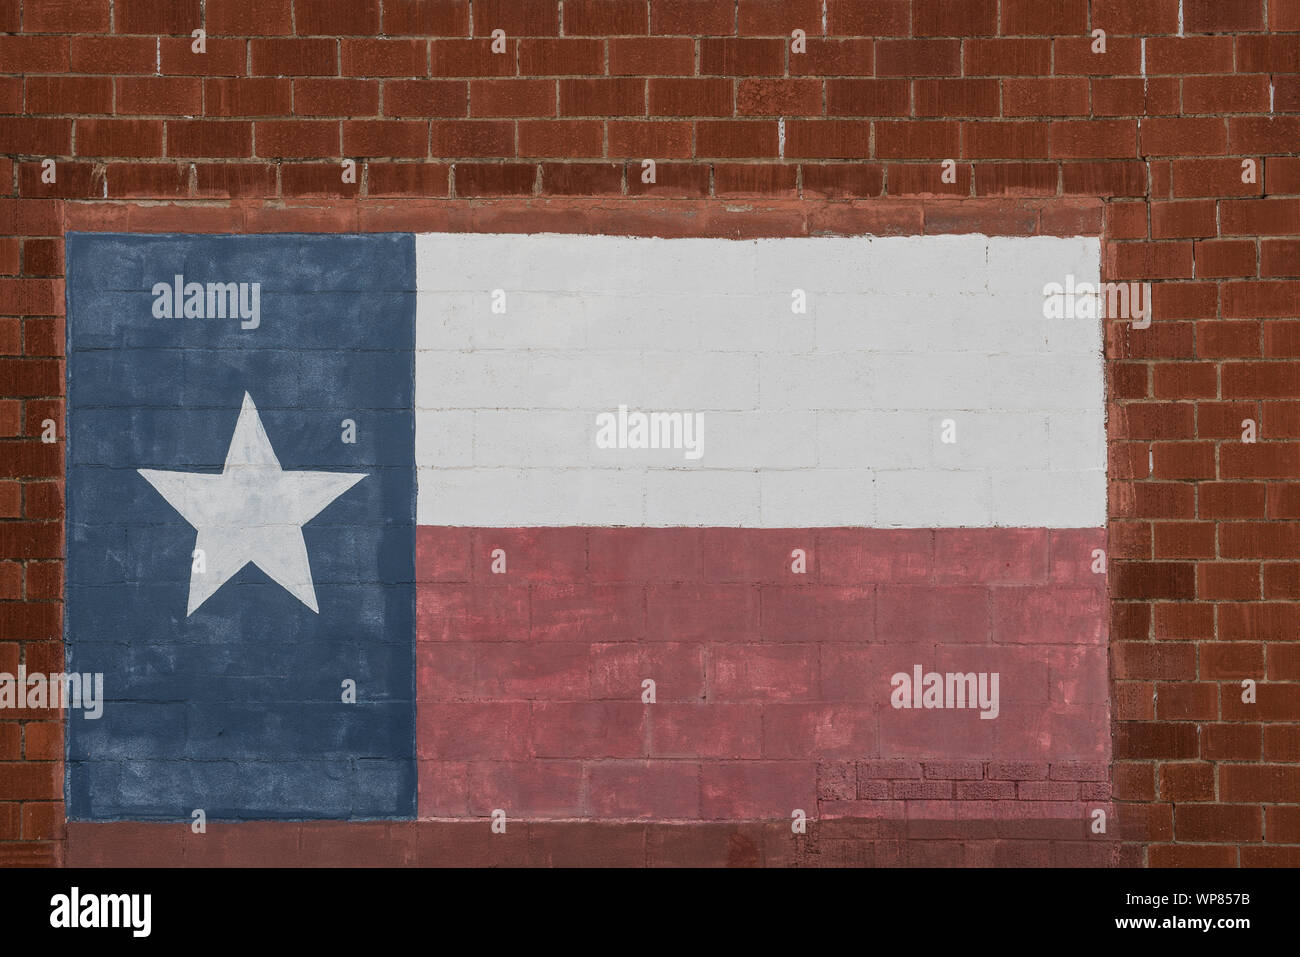 Likeness of the Texas Lone Star state flag, painted on the bricks of a building in Cisco, Texas Stock Photo